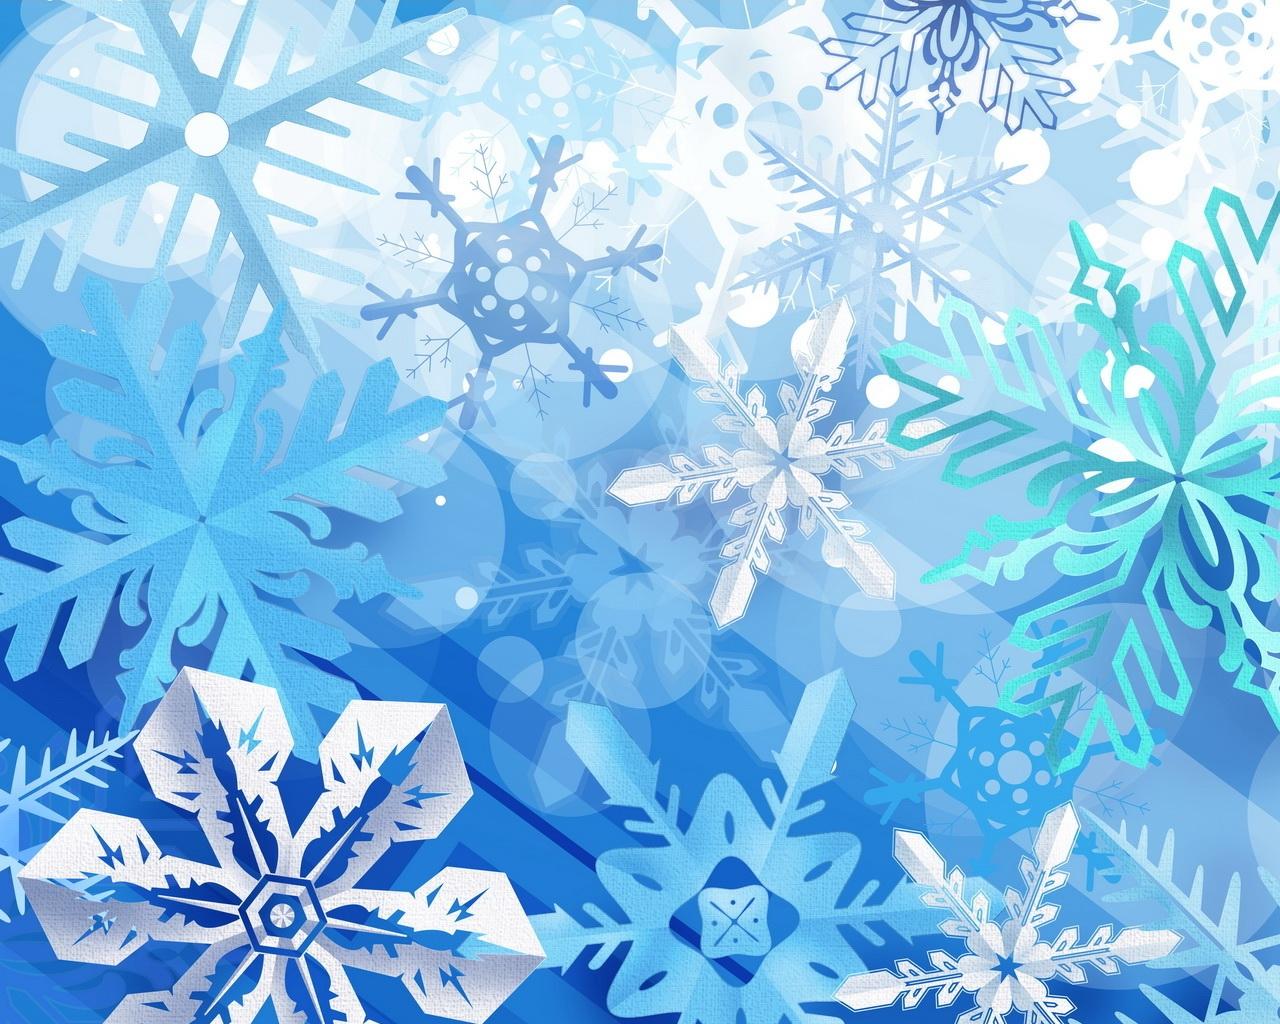 Abstract Winter Snowflakes Graphic PPT Backgrounds